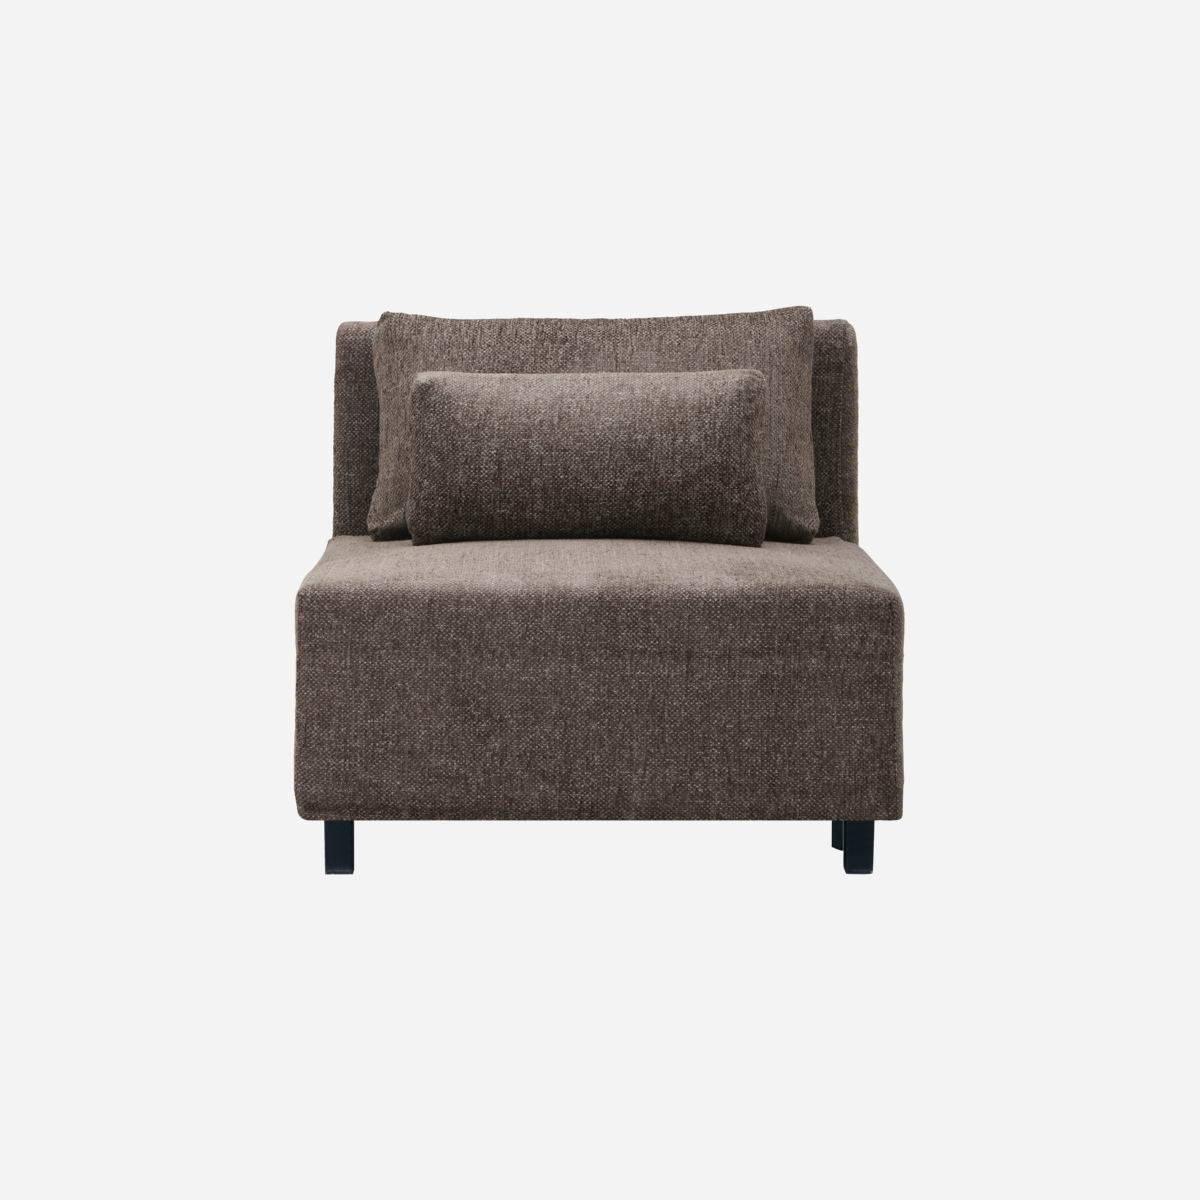 Sofa, Middle section, Camphor, Dark brown House Doctor